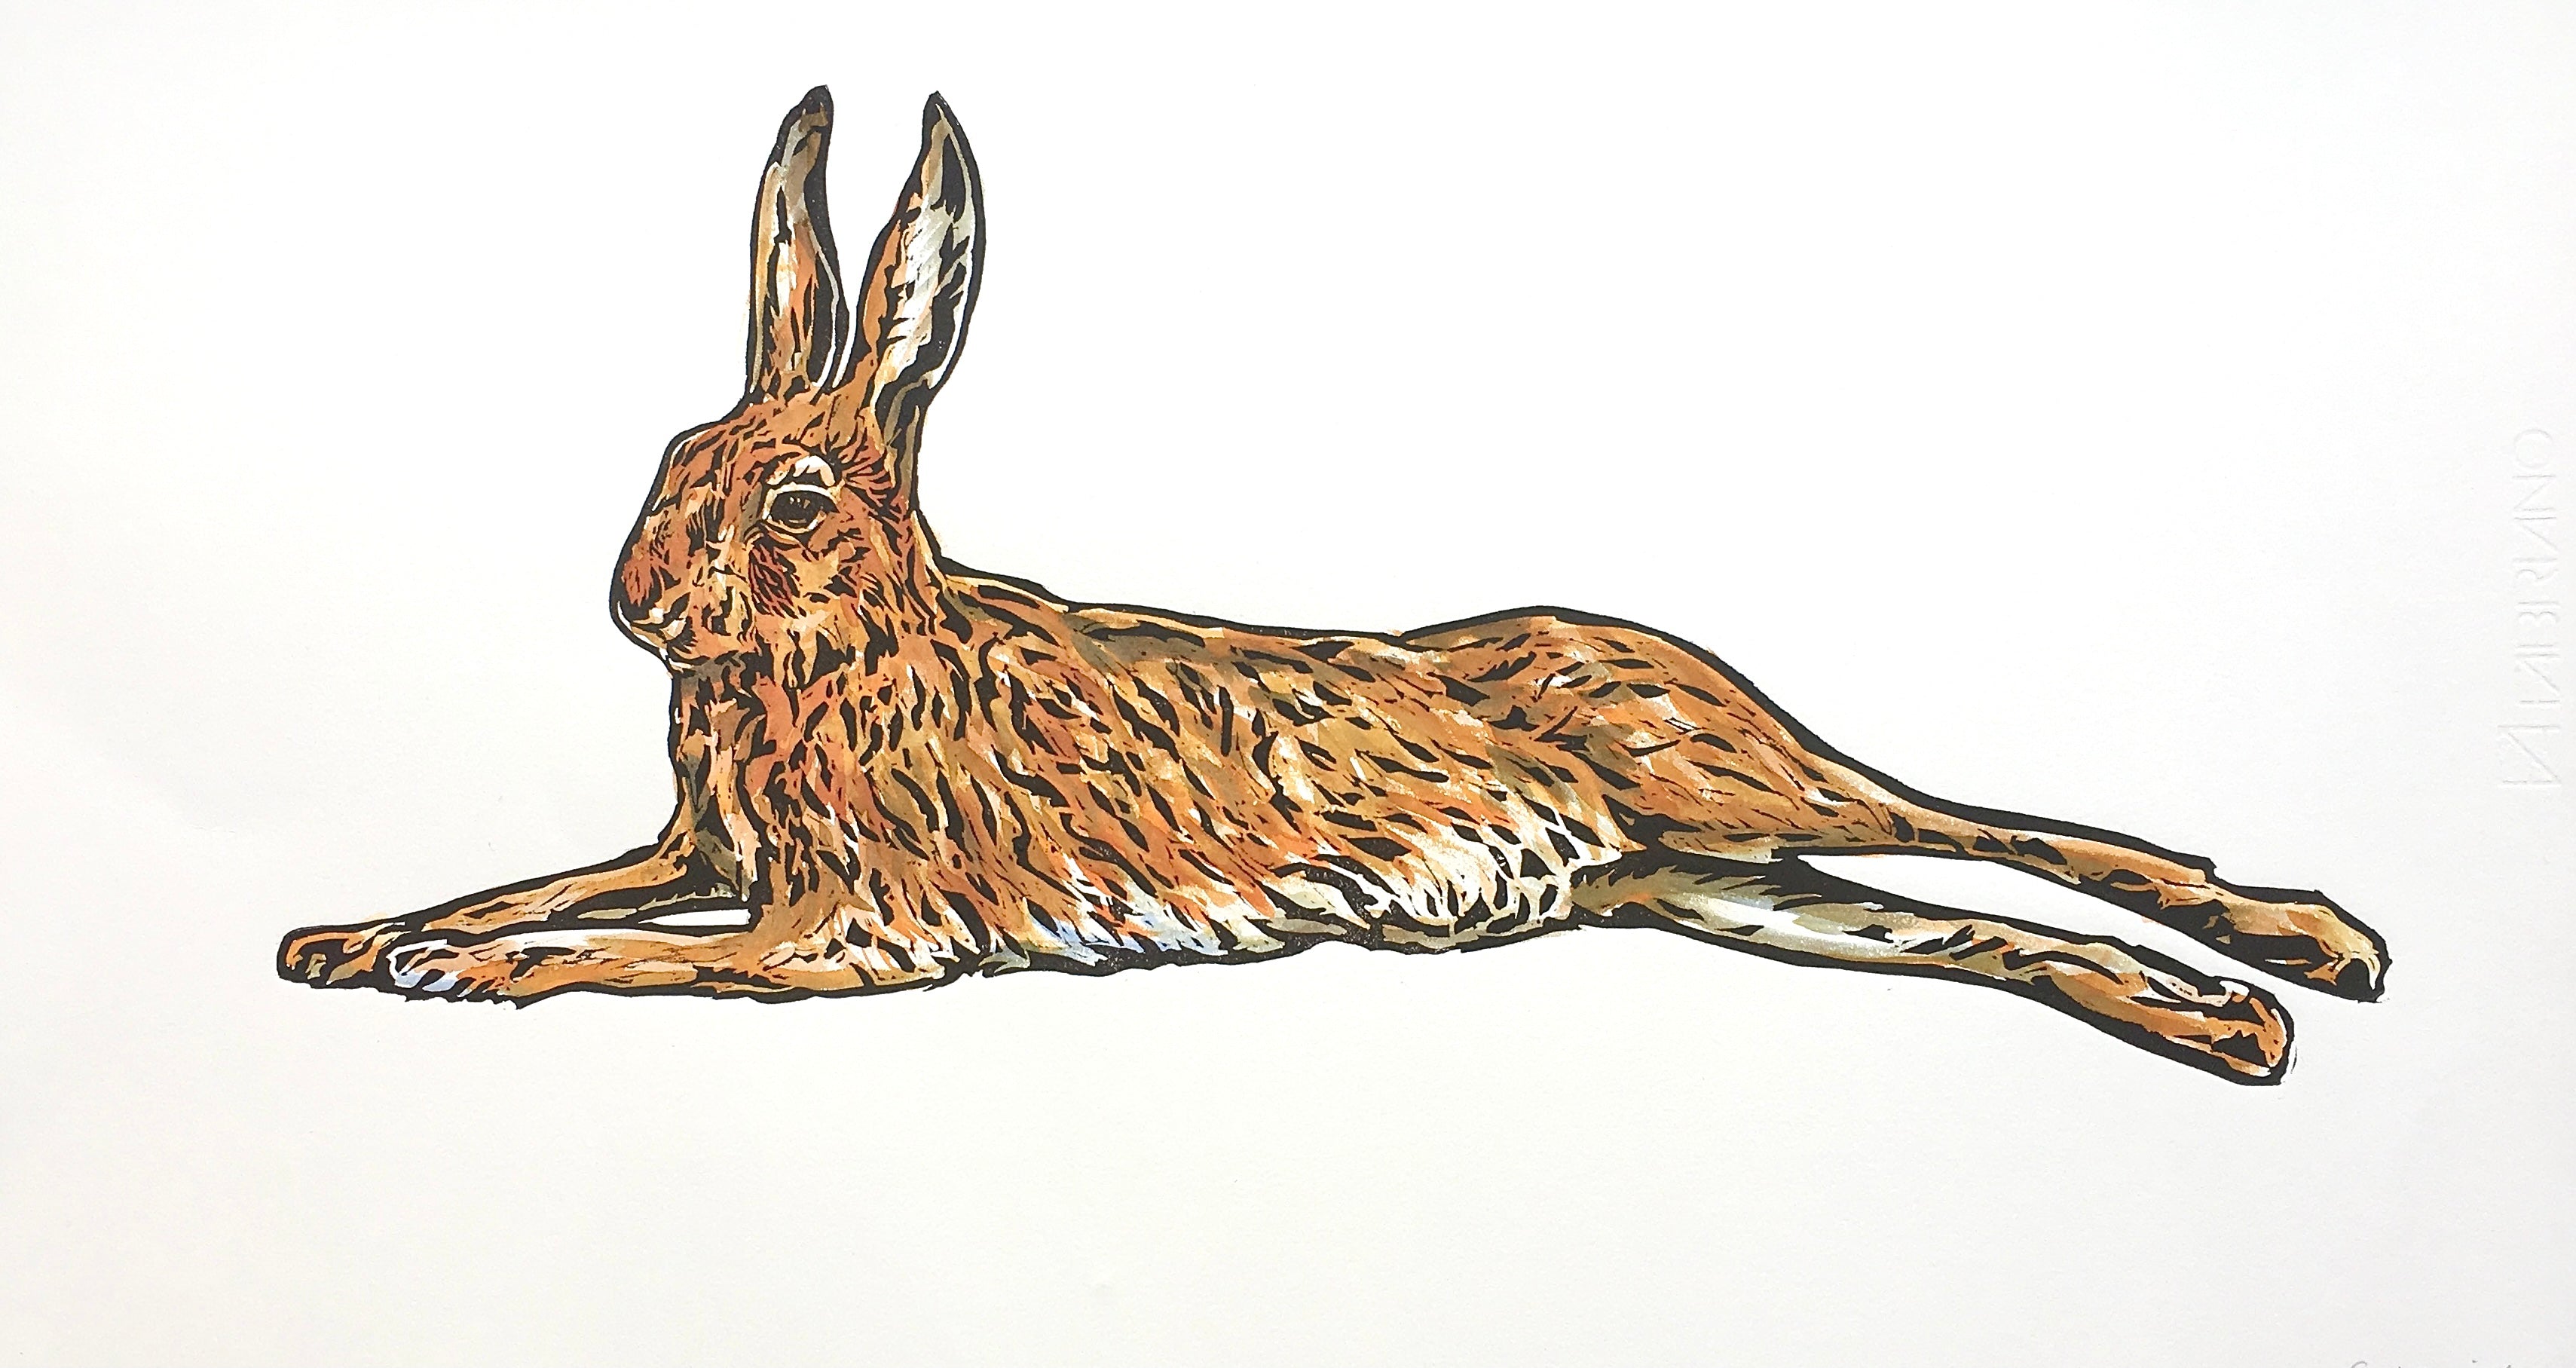 'Lazy Days' - Original Hand Printed, Hand Coloured Linocut by Sarah Cemmick